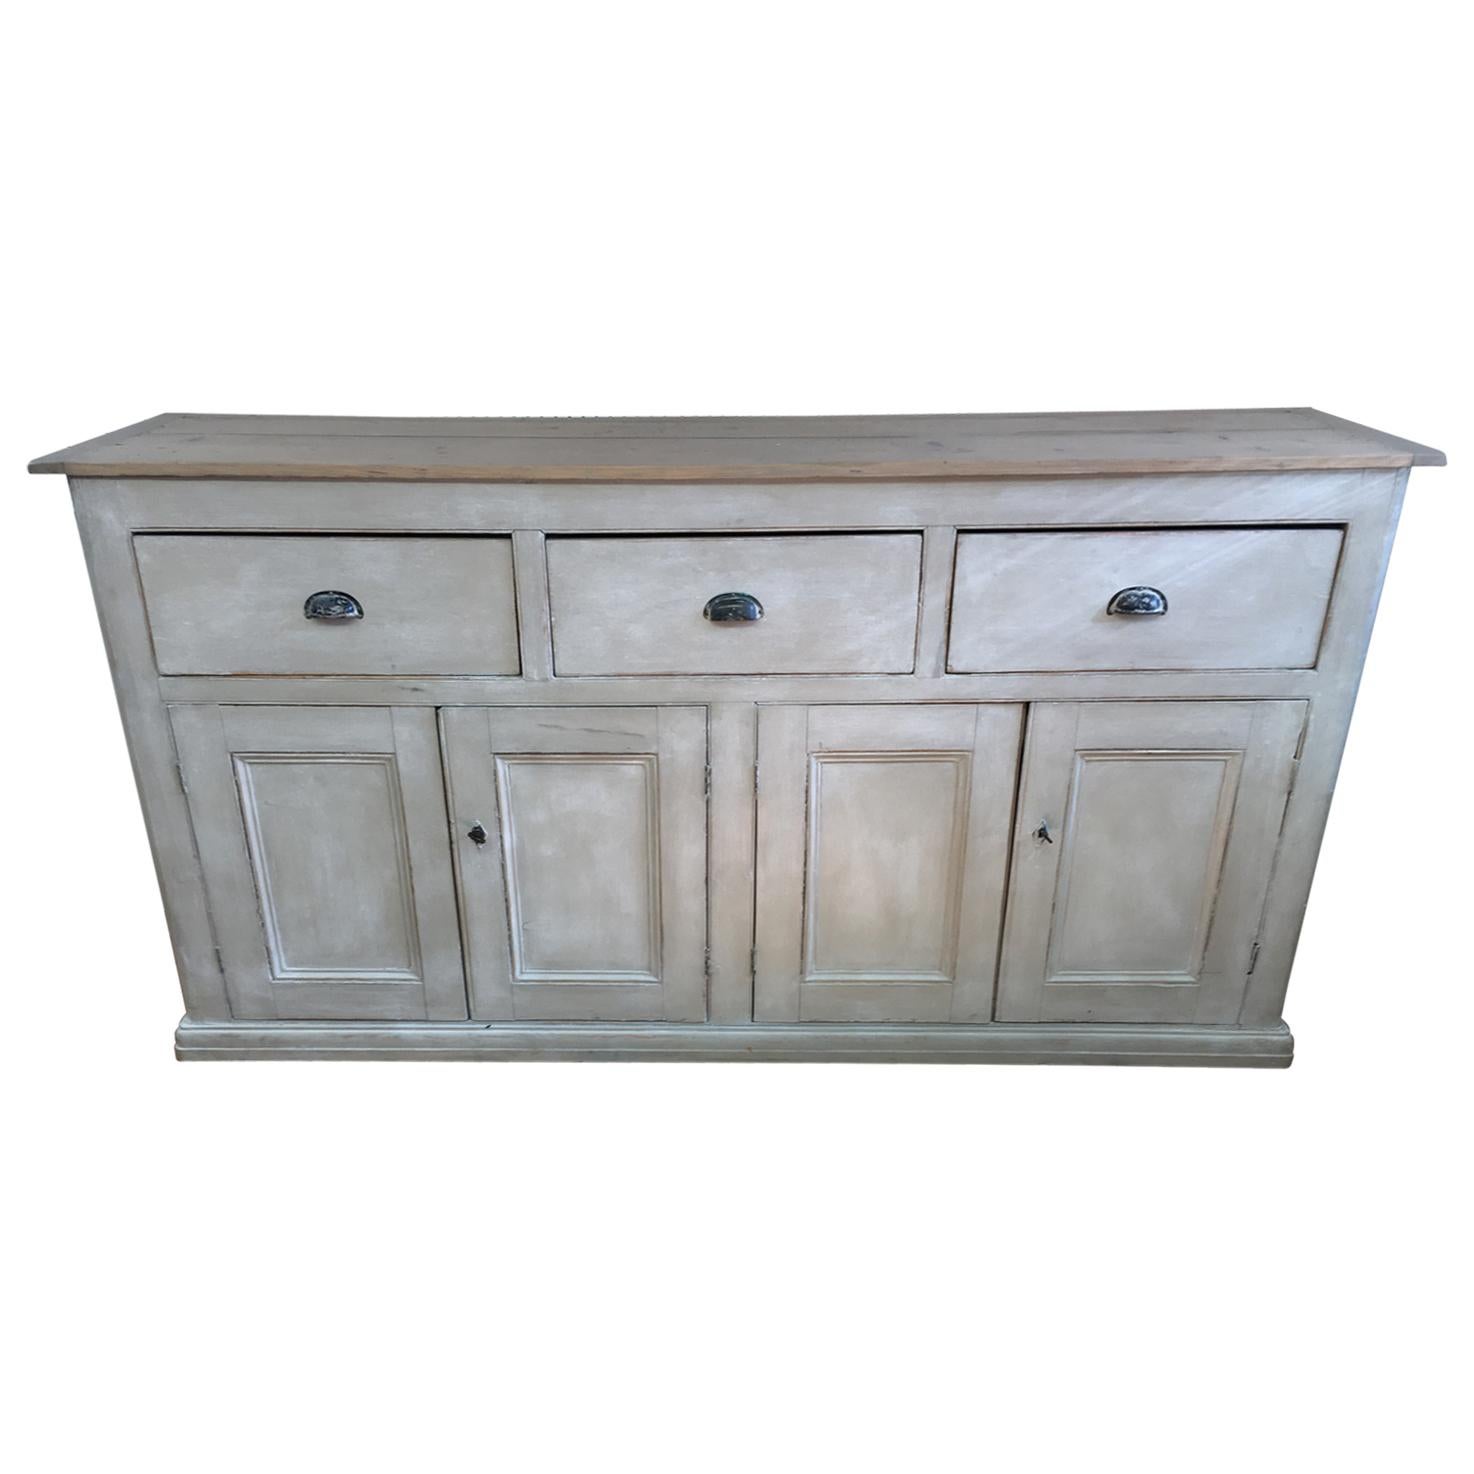 4-Door, 3-Drawer English Base with Scrubbed Pine Top